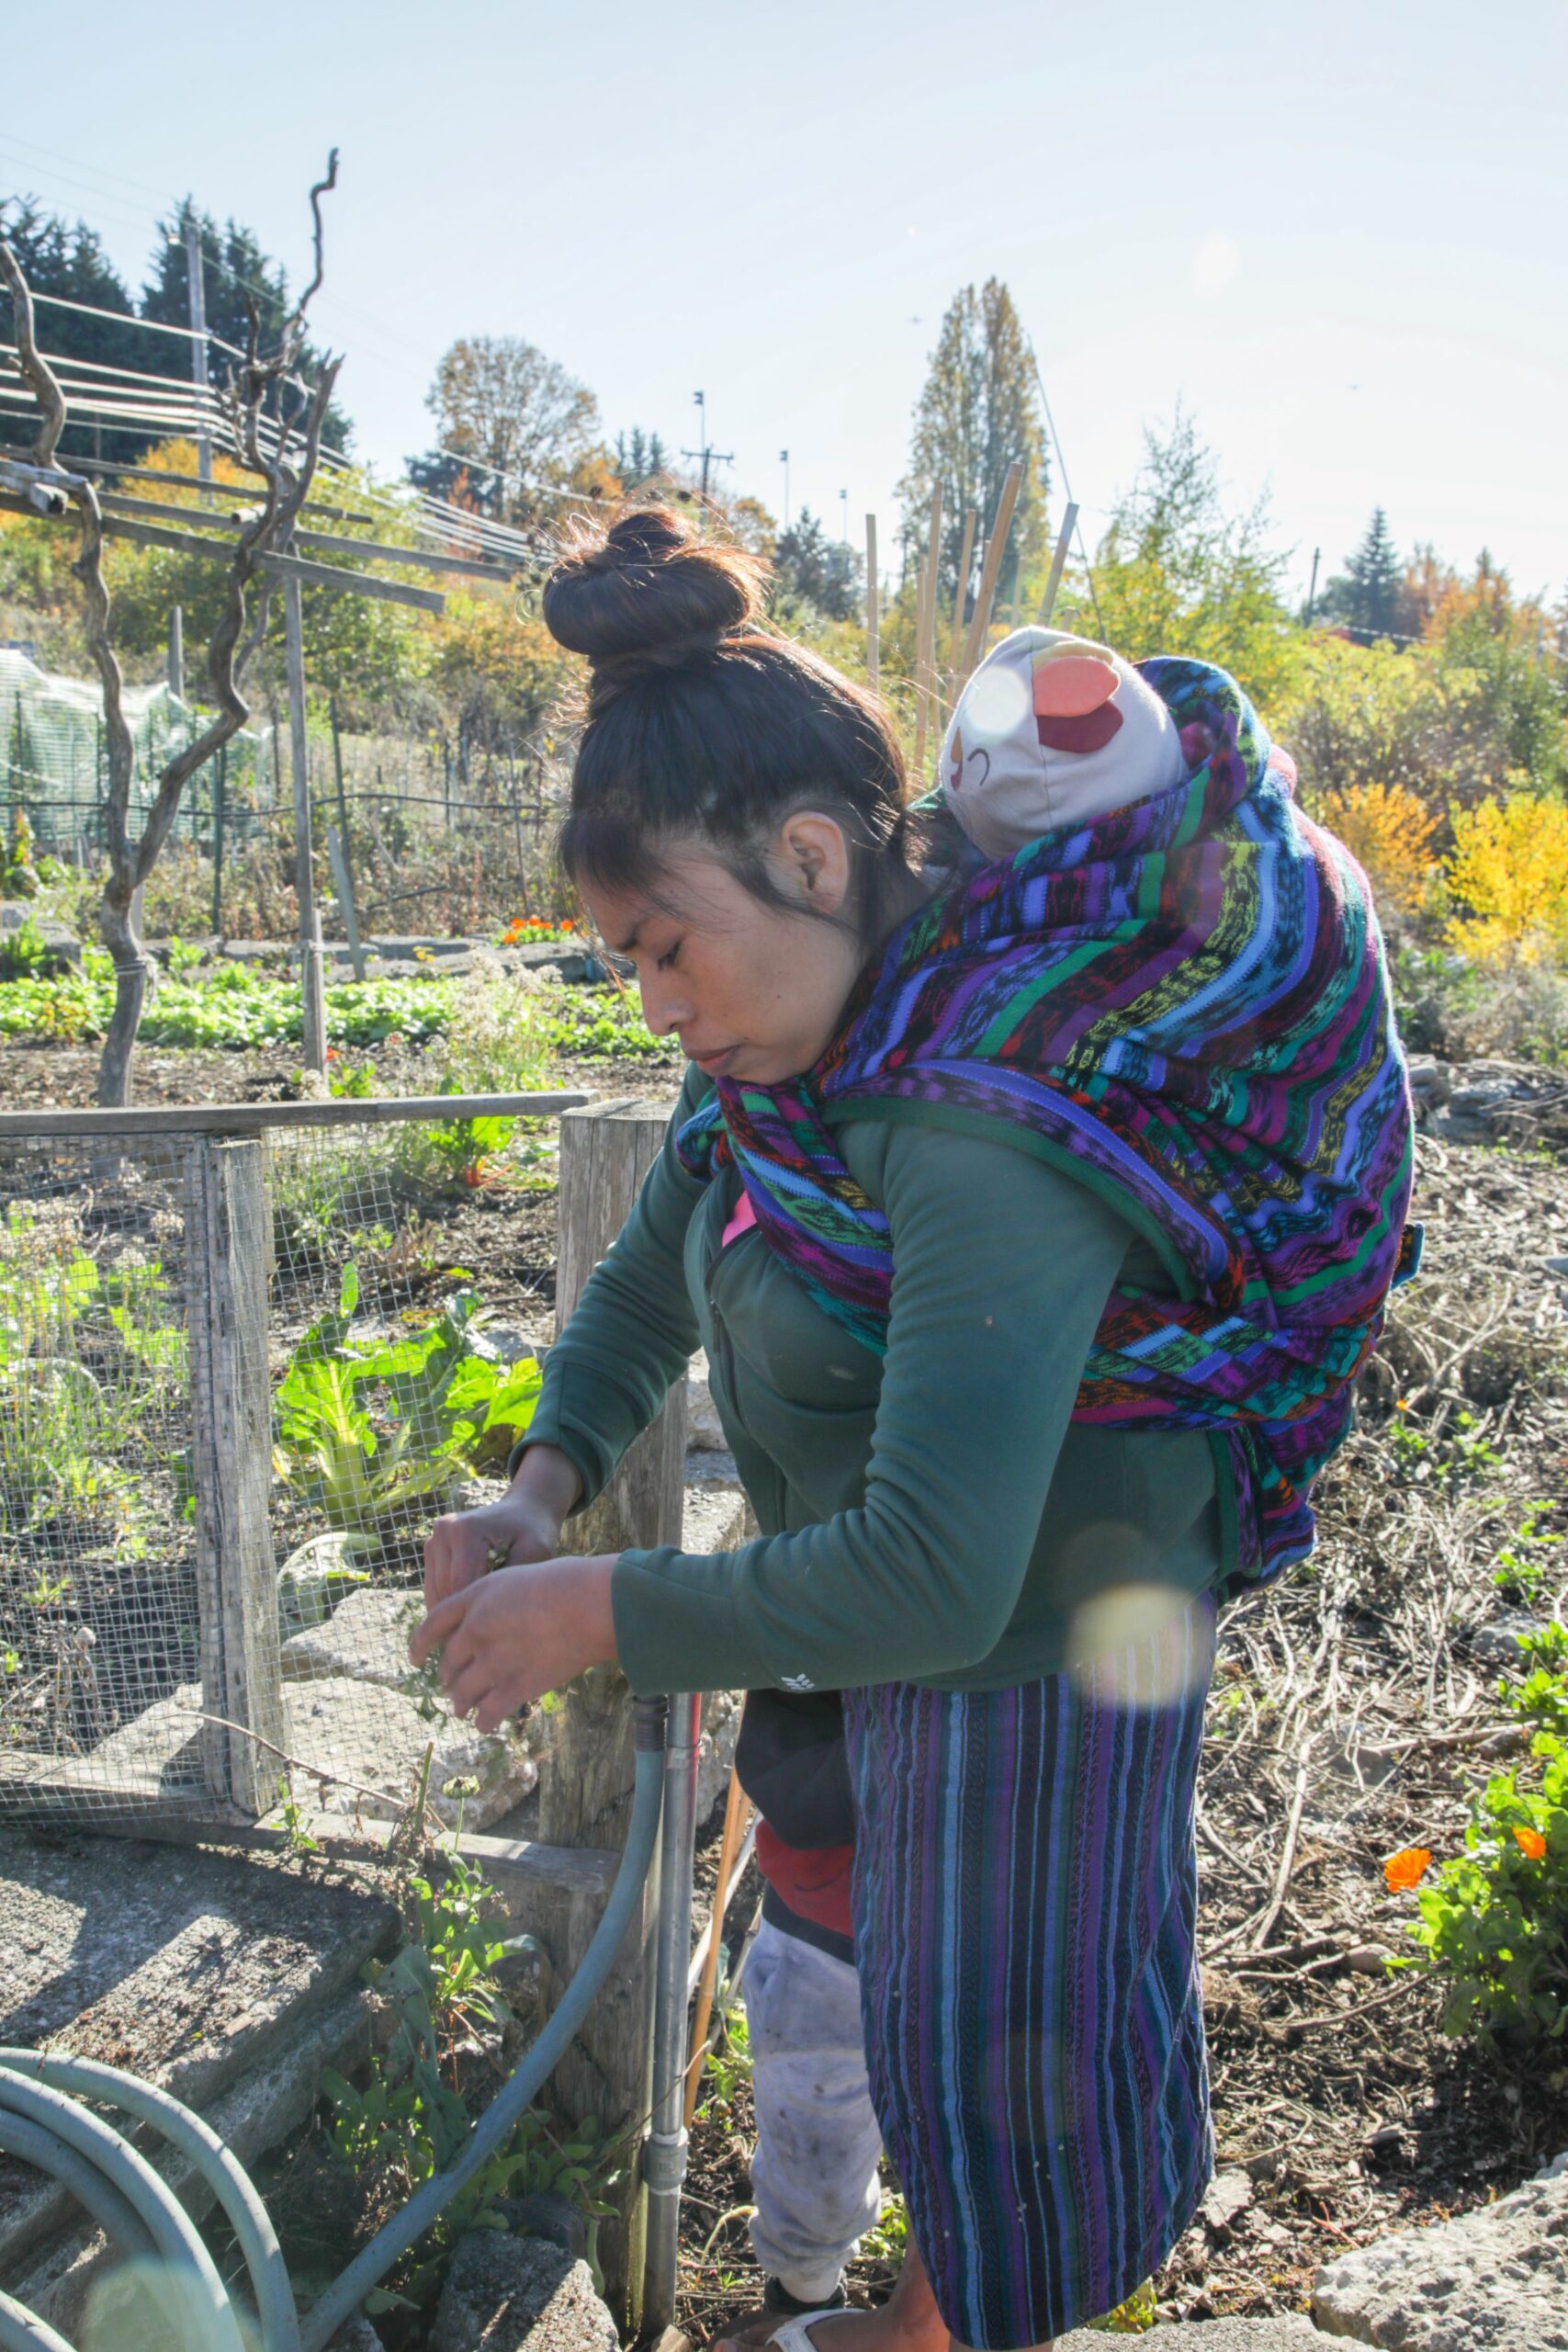 A woman with her baby in a carrier on her back tends to a garden